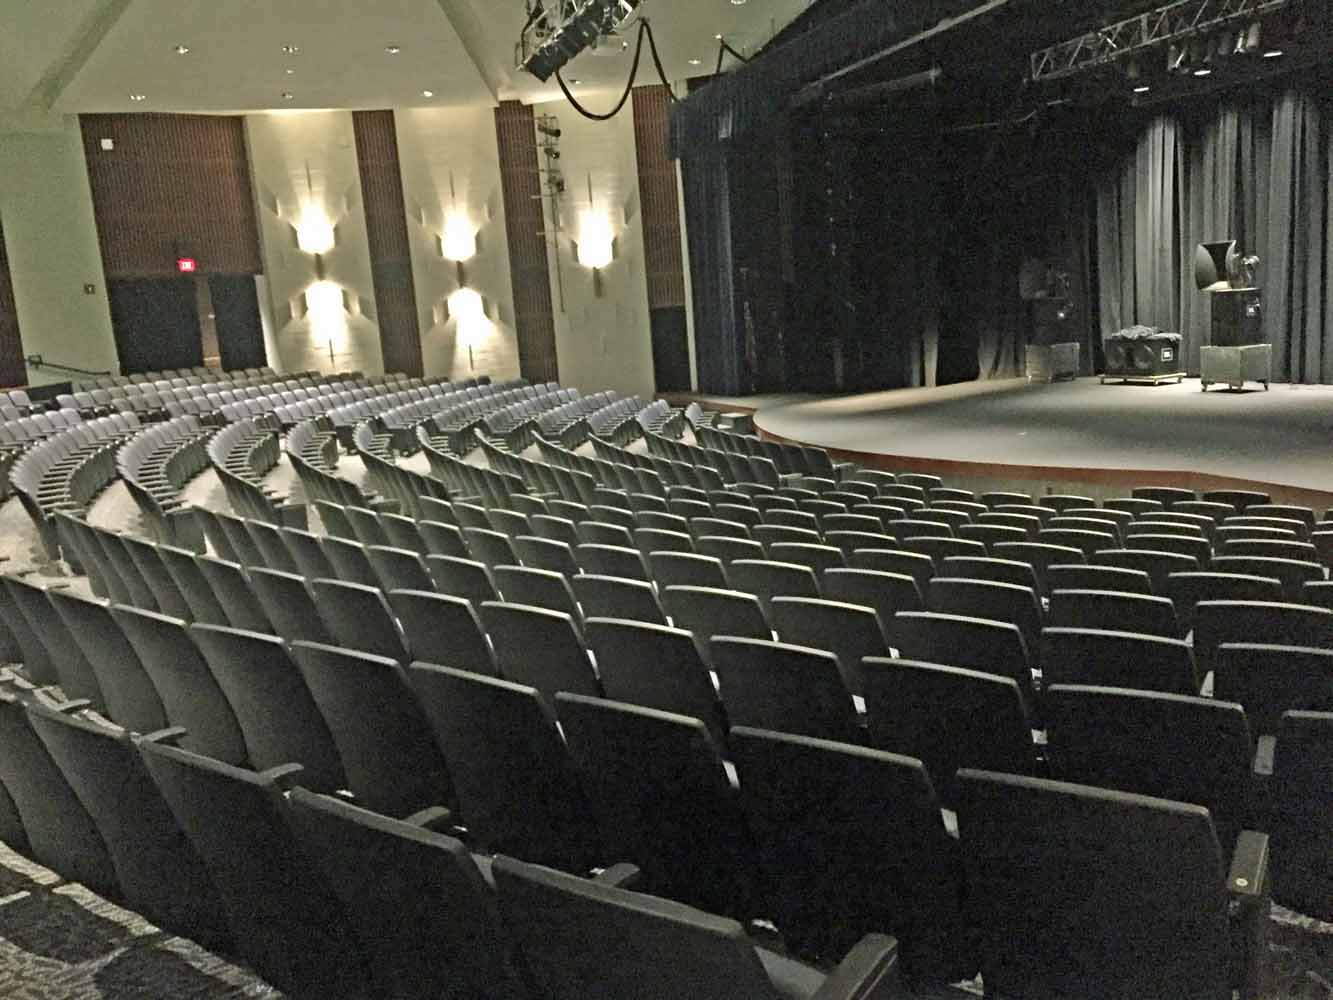 Pollak Theatre before crowds arrive